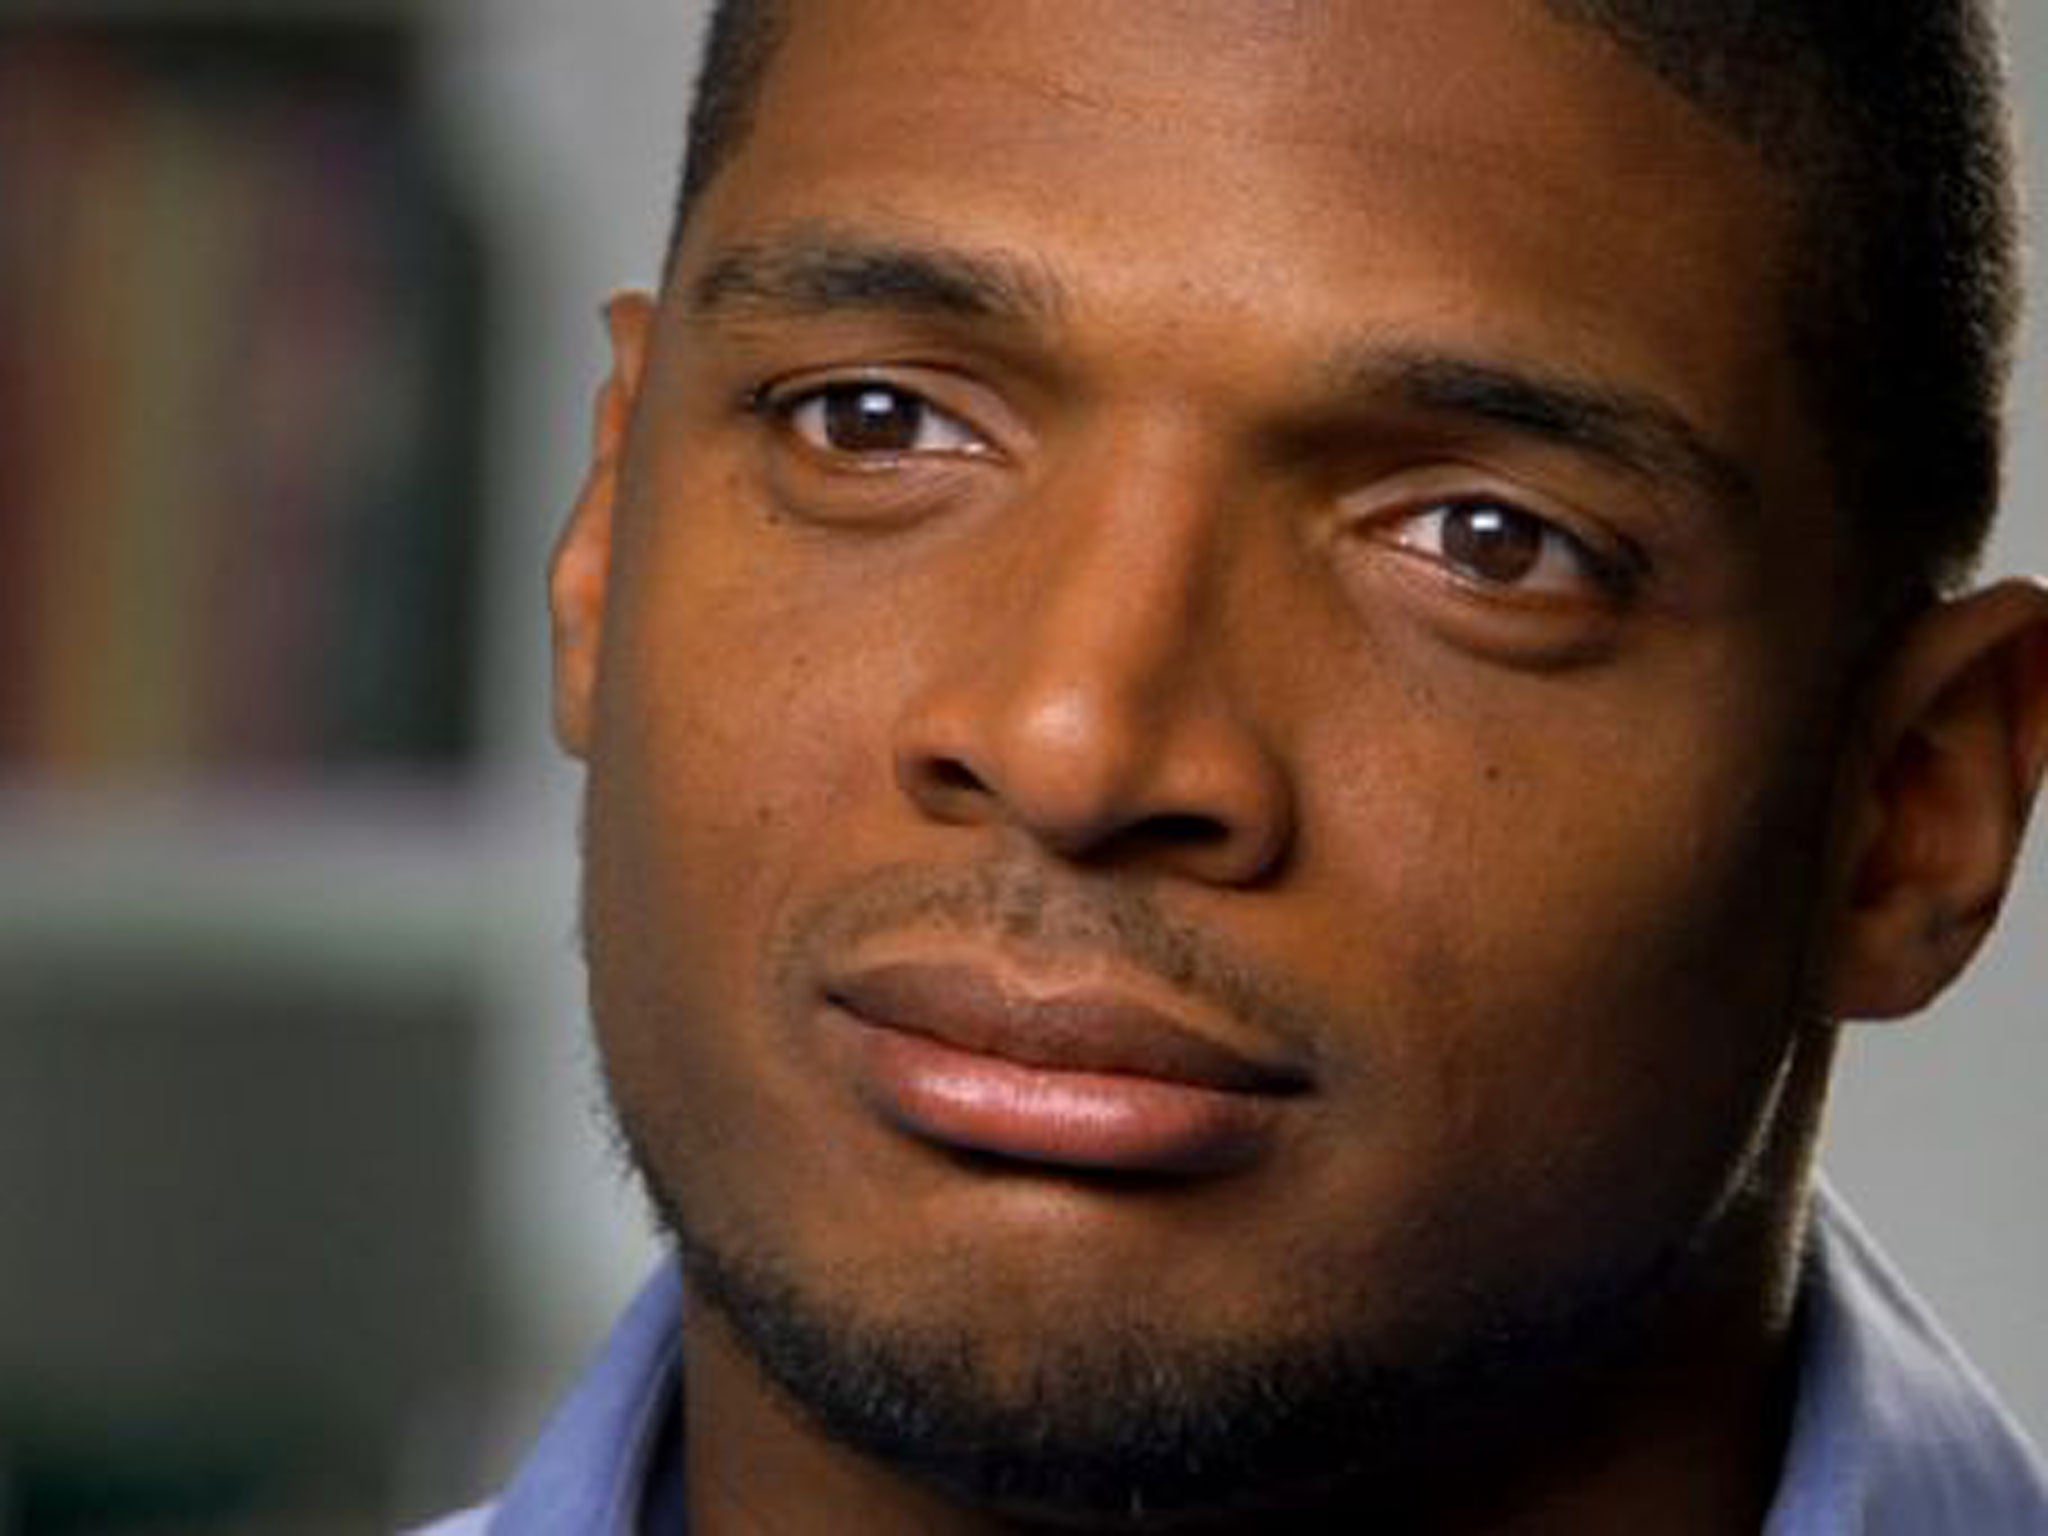 Michael Sam revealed his sexuality on ESPN's Outside the Lines show